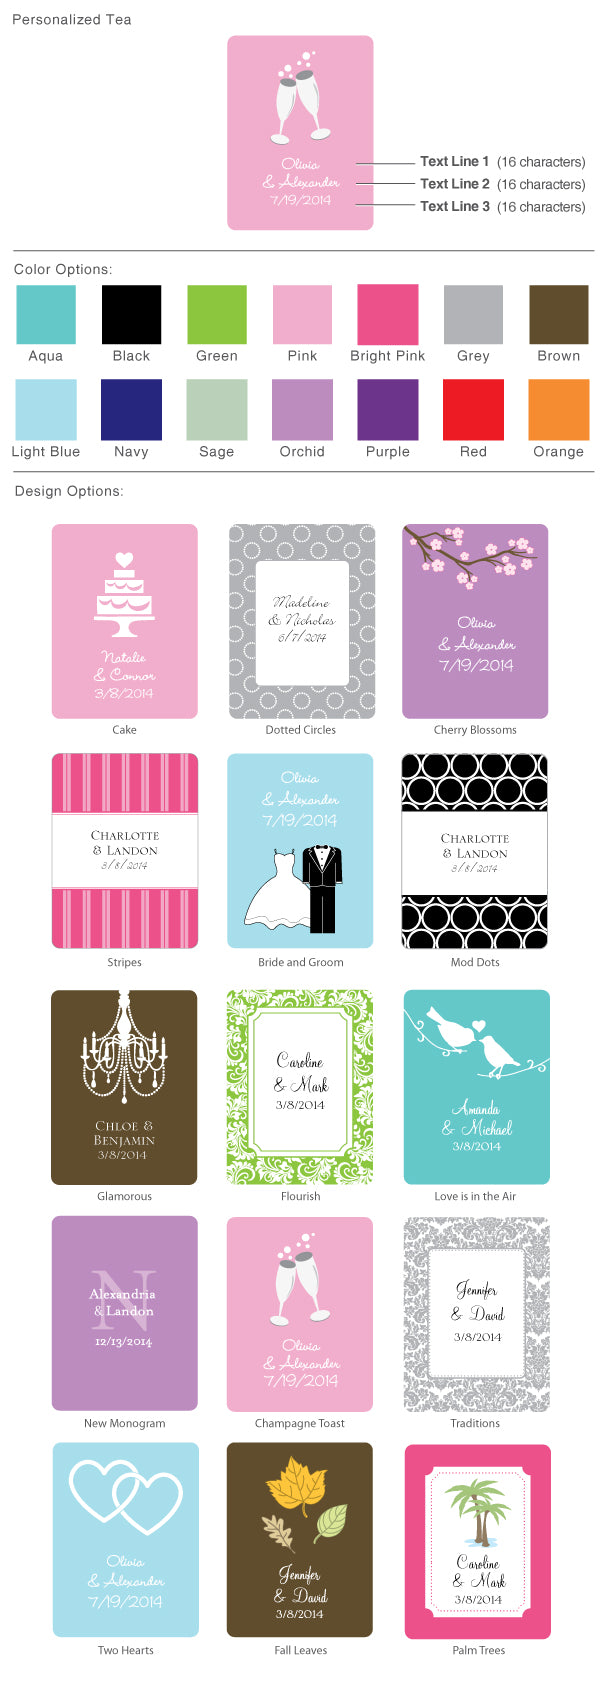 Personalized Wedding Tea Packs (Many Designs Available) - Alternate Image 2 | My Wedding Favors